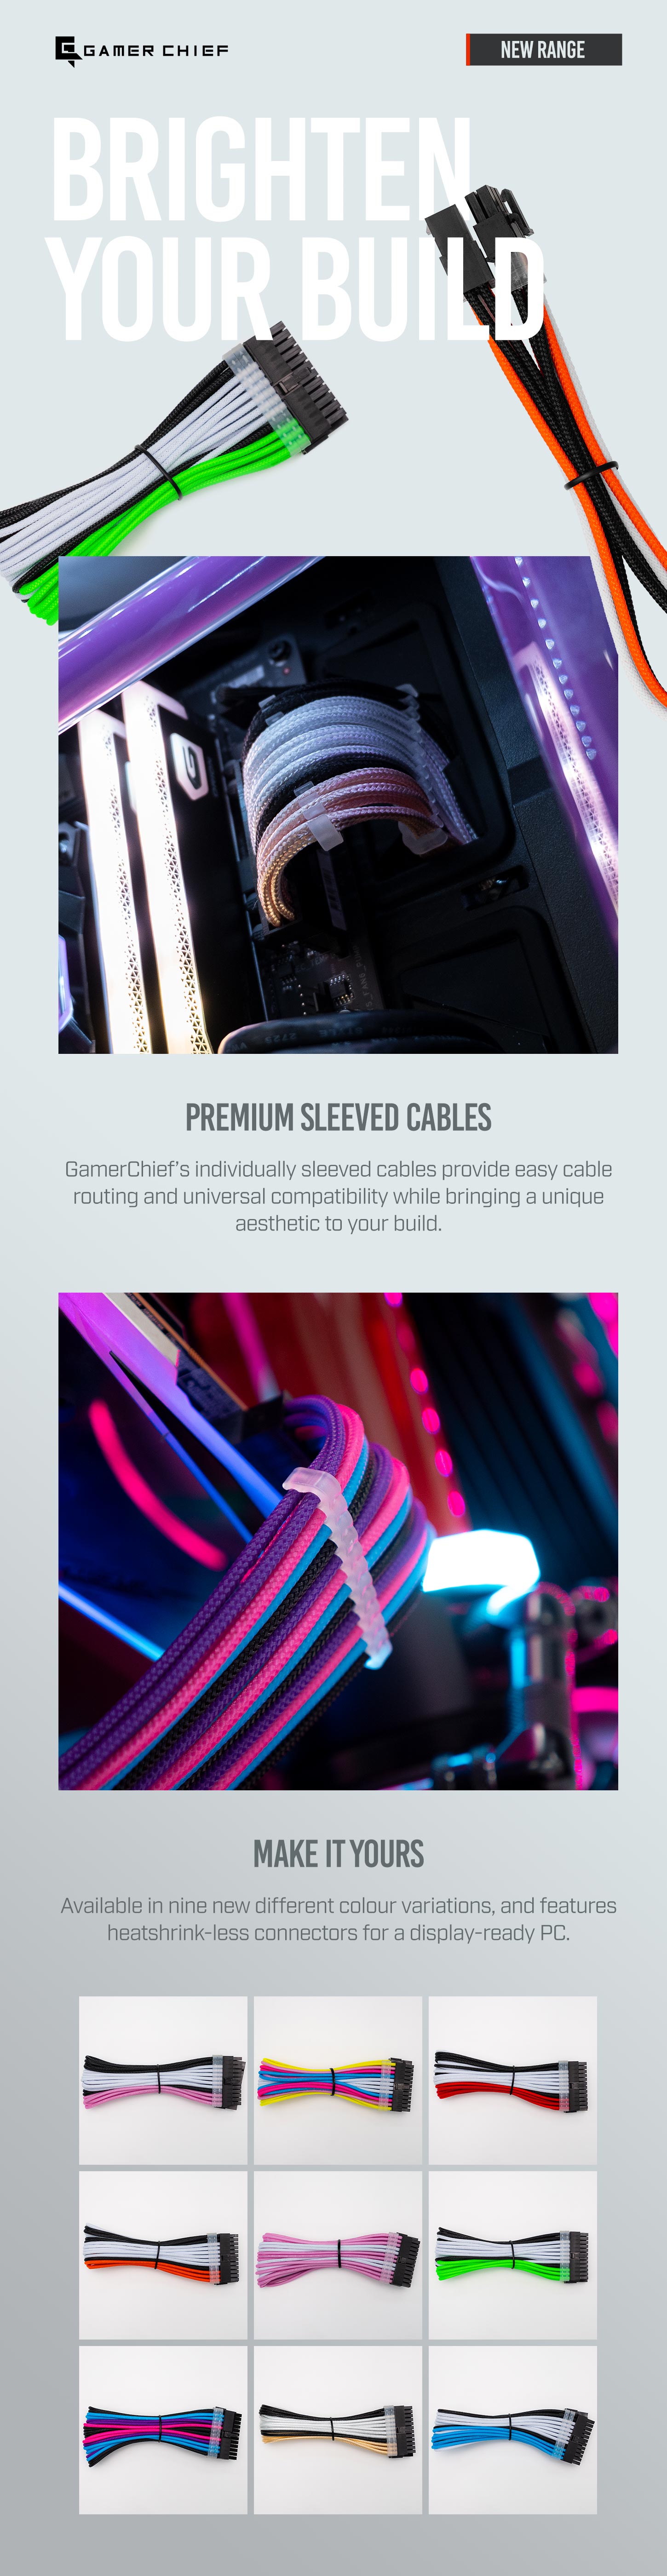 A large marketing image providing additional information about the product GamerChief Elite Series 8-Pin EPS 30cm Sleeved Extension Cable (Green/White/Black) - Additional alt info not provided